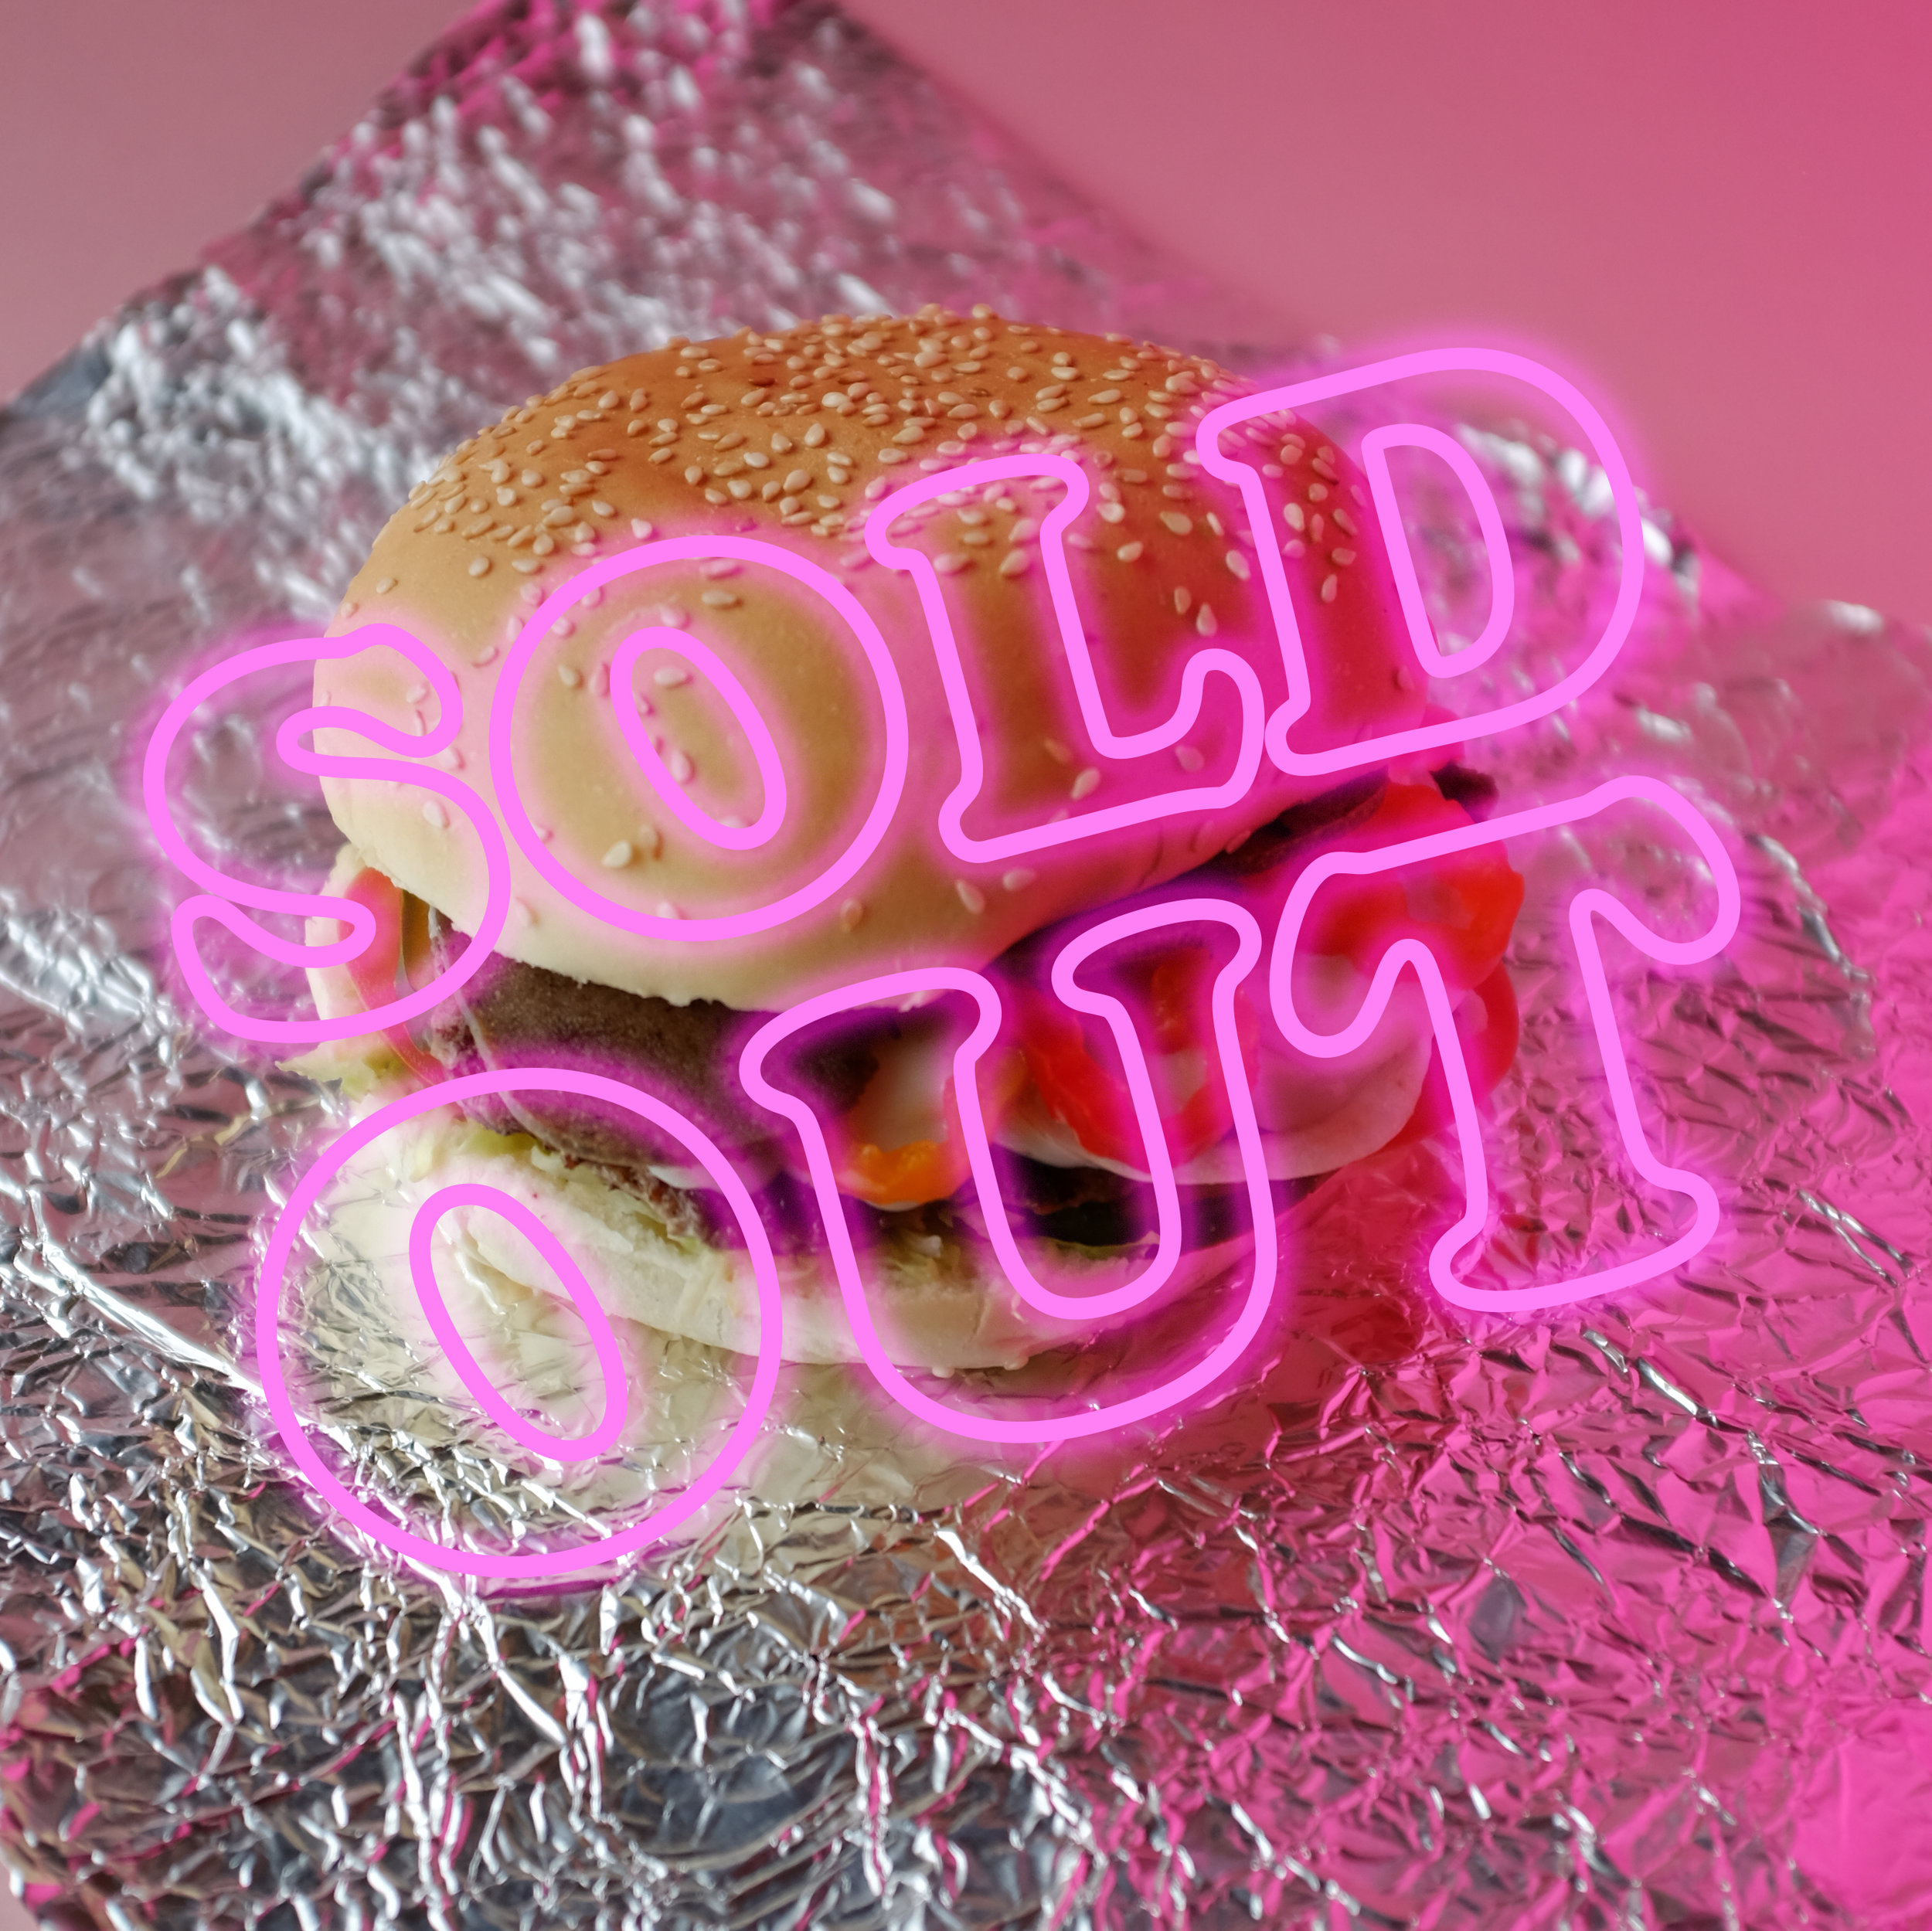 Sold_Out.jpg